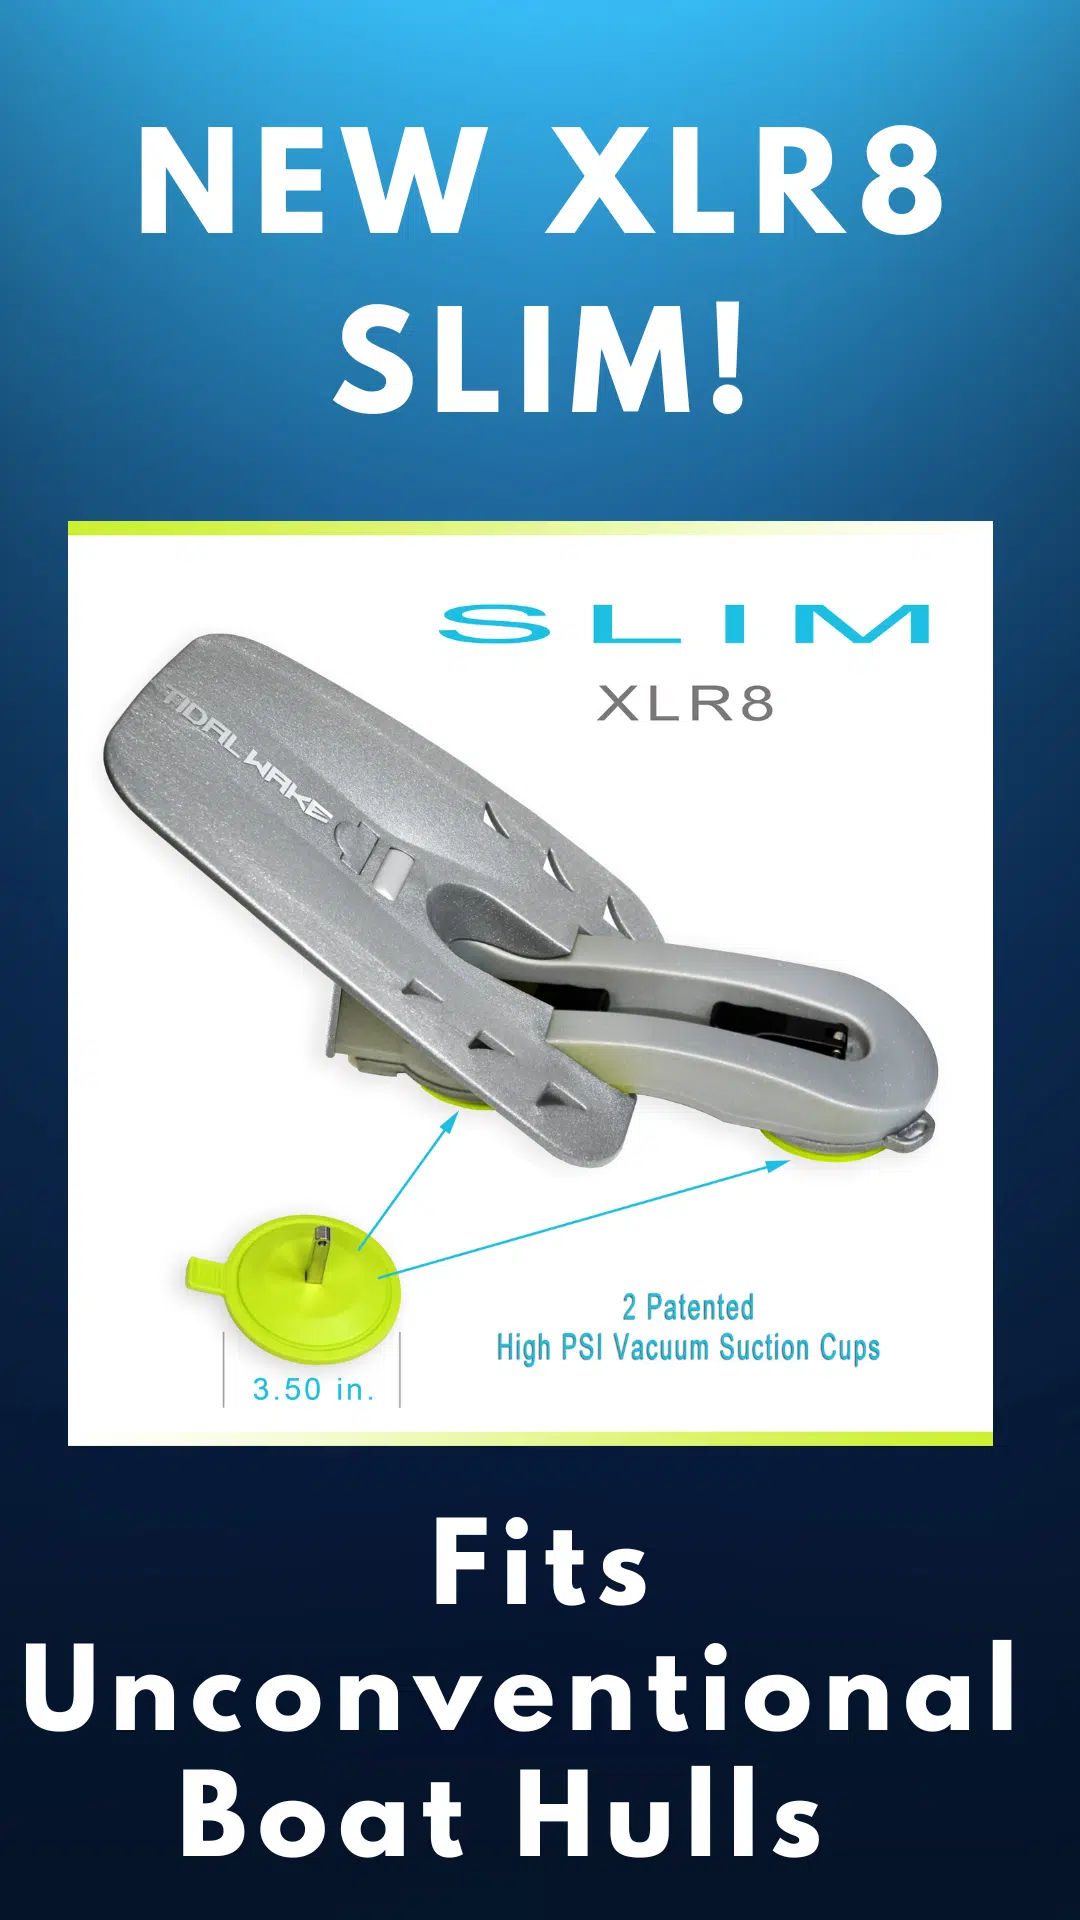 New XLR8 Wake Shaper for Boats with  unconventional hulls